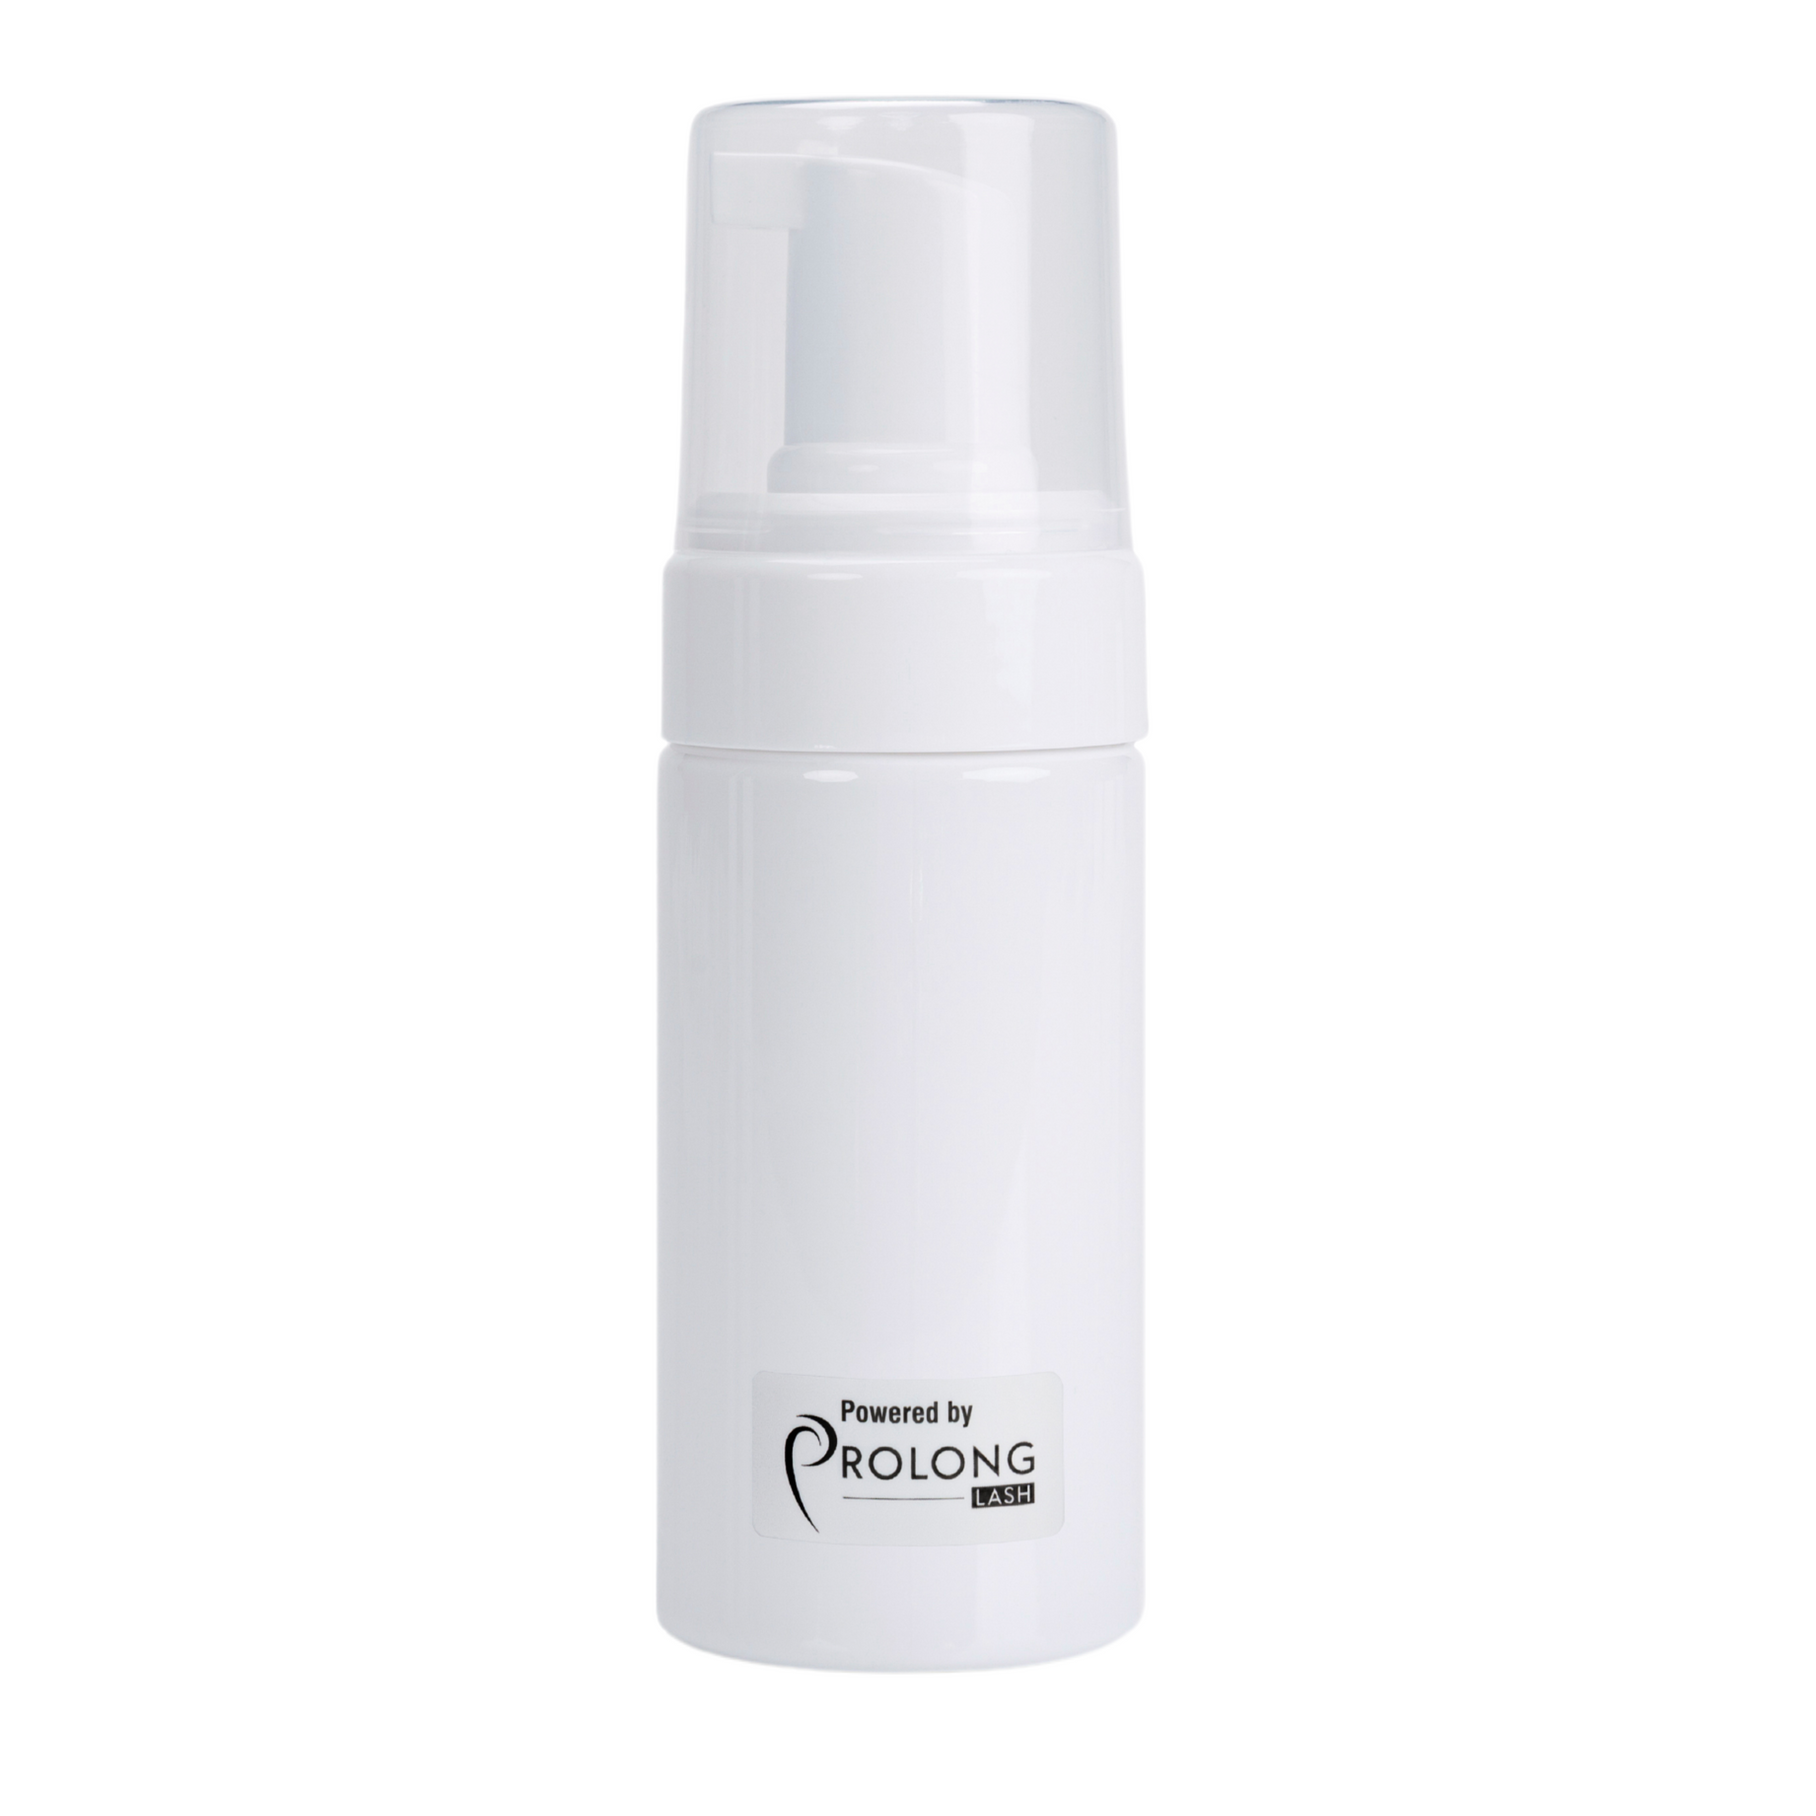 Eyelash Extension Cleanser "Powered By Prolong Lash" Labels